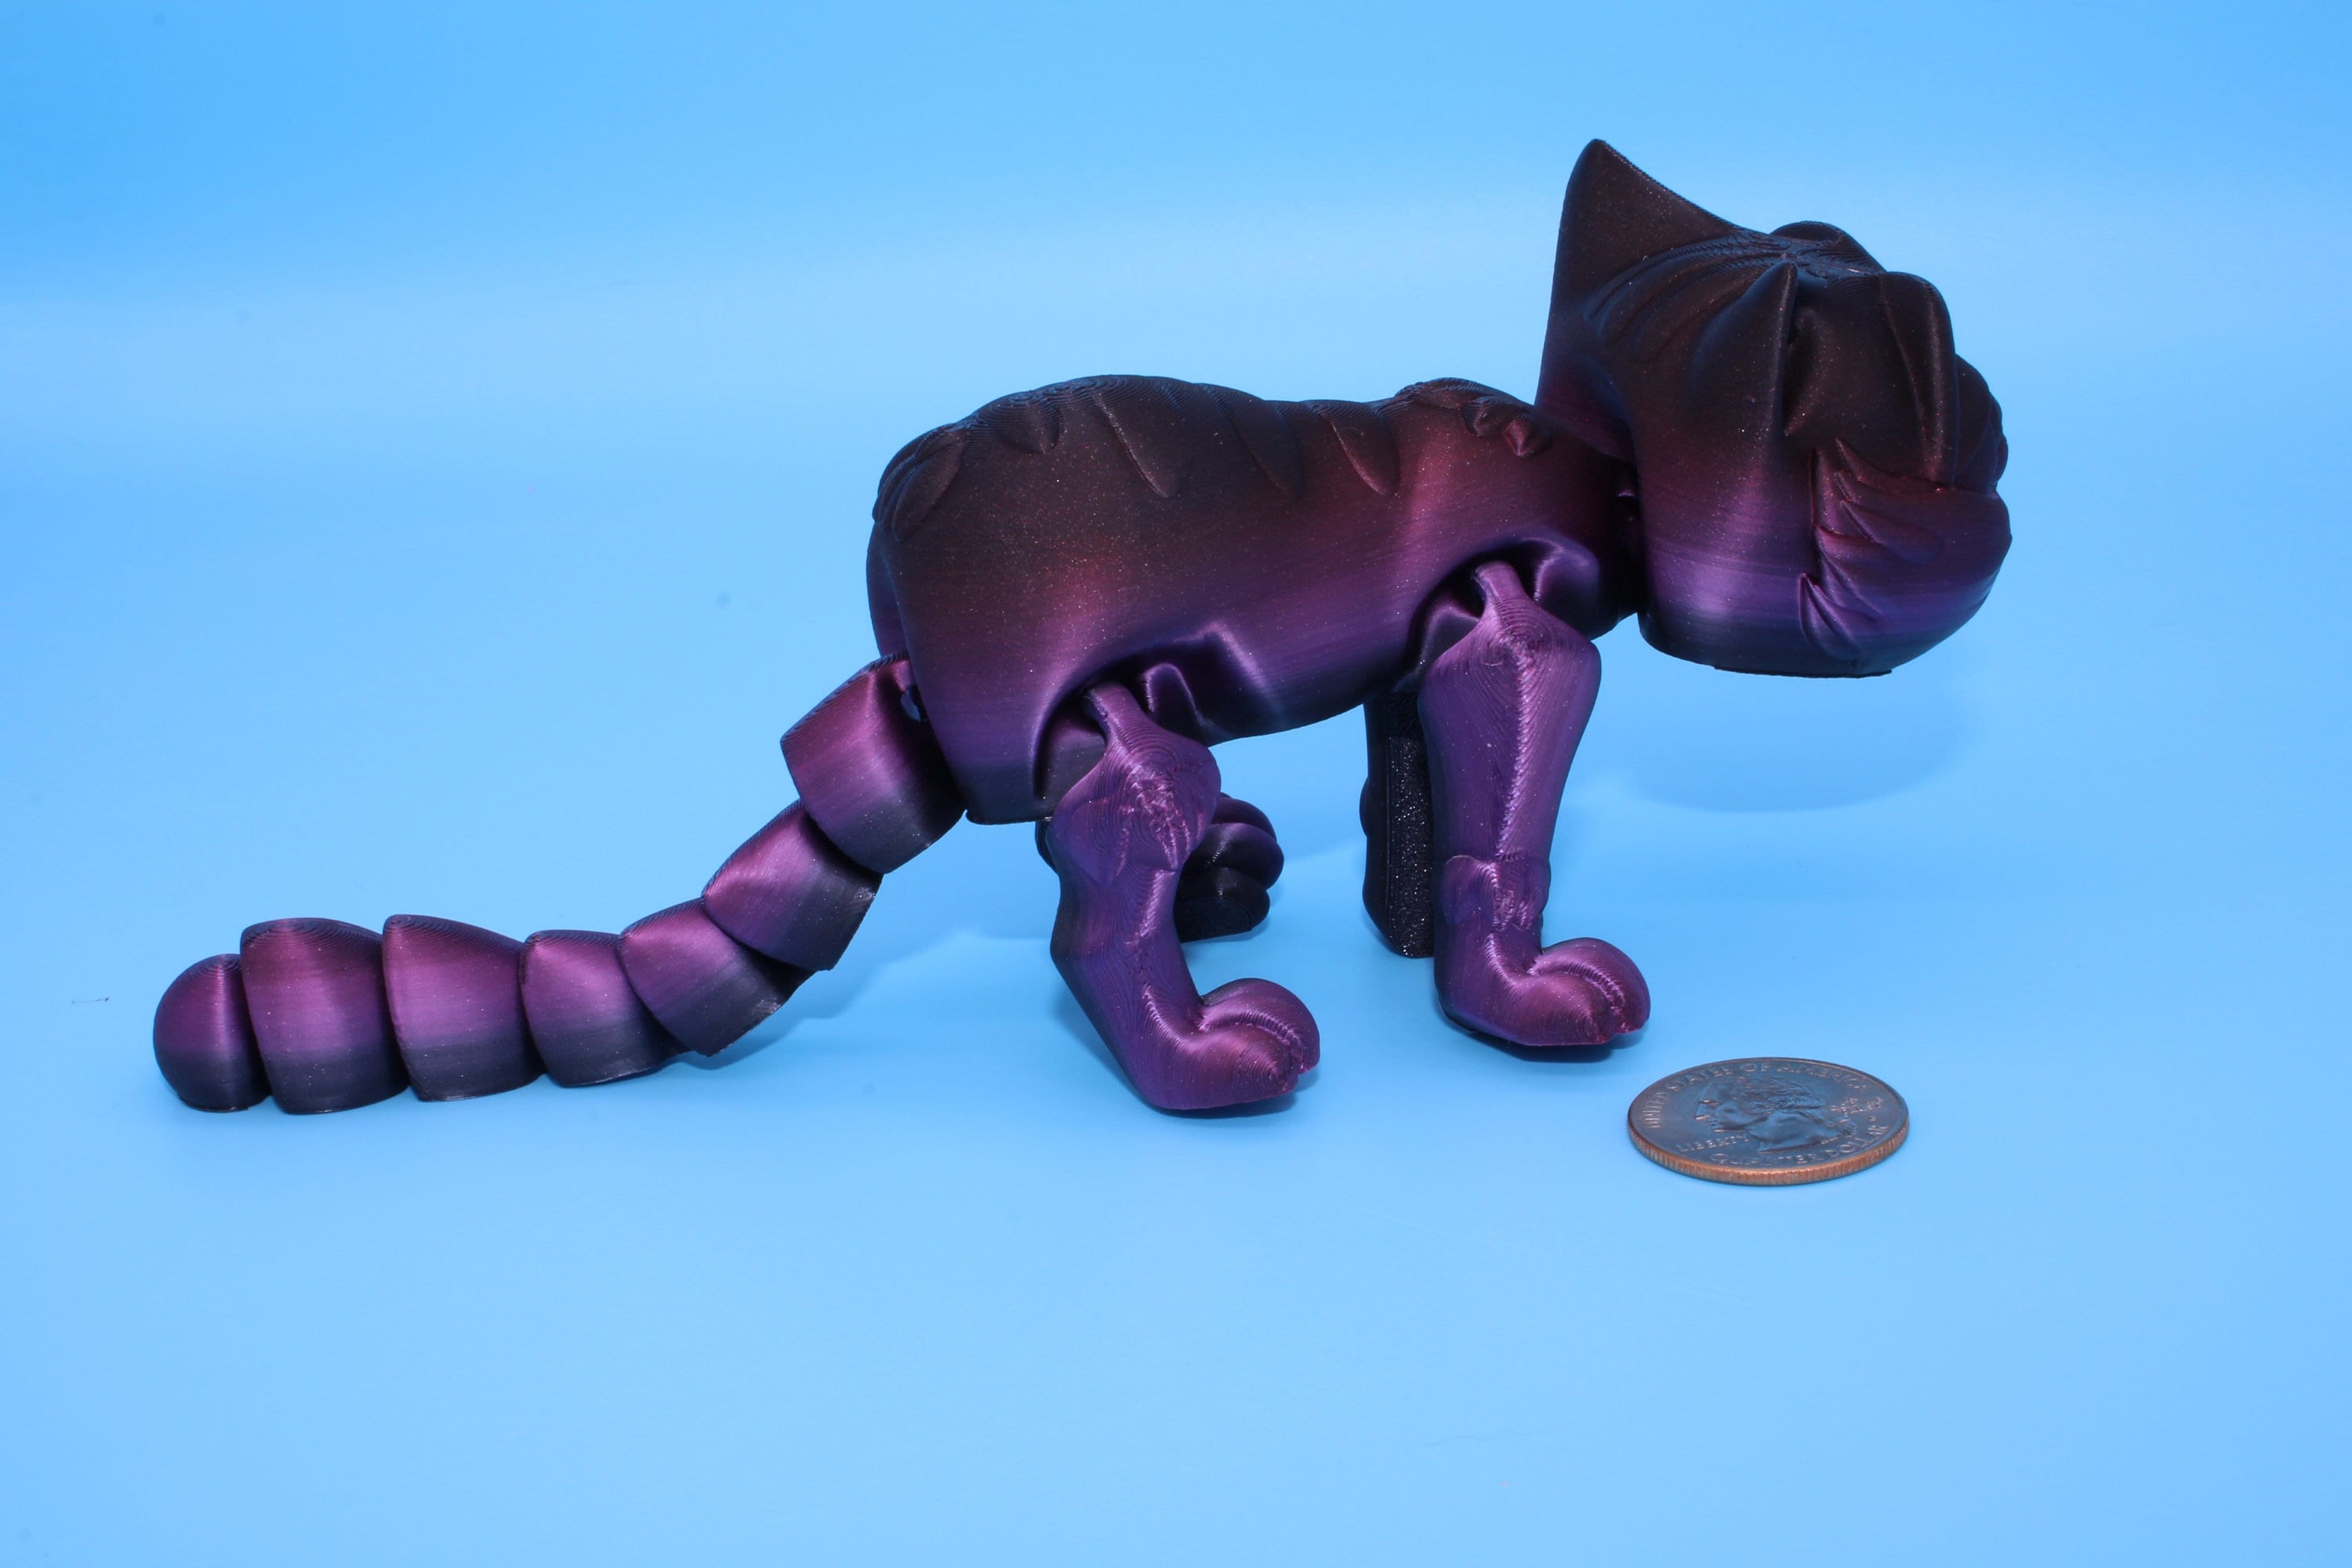 7 inch Cat Multi Color | Fidget Toy | 3D printed Kitten | Articulating Kitty | Flexi Toy | Stress Relief Gift